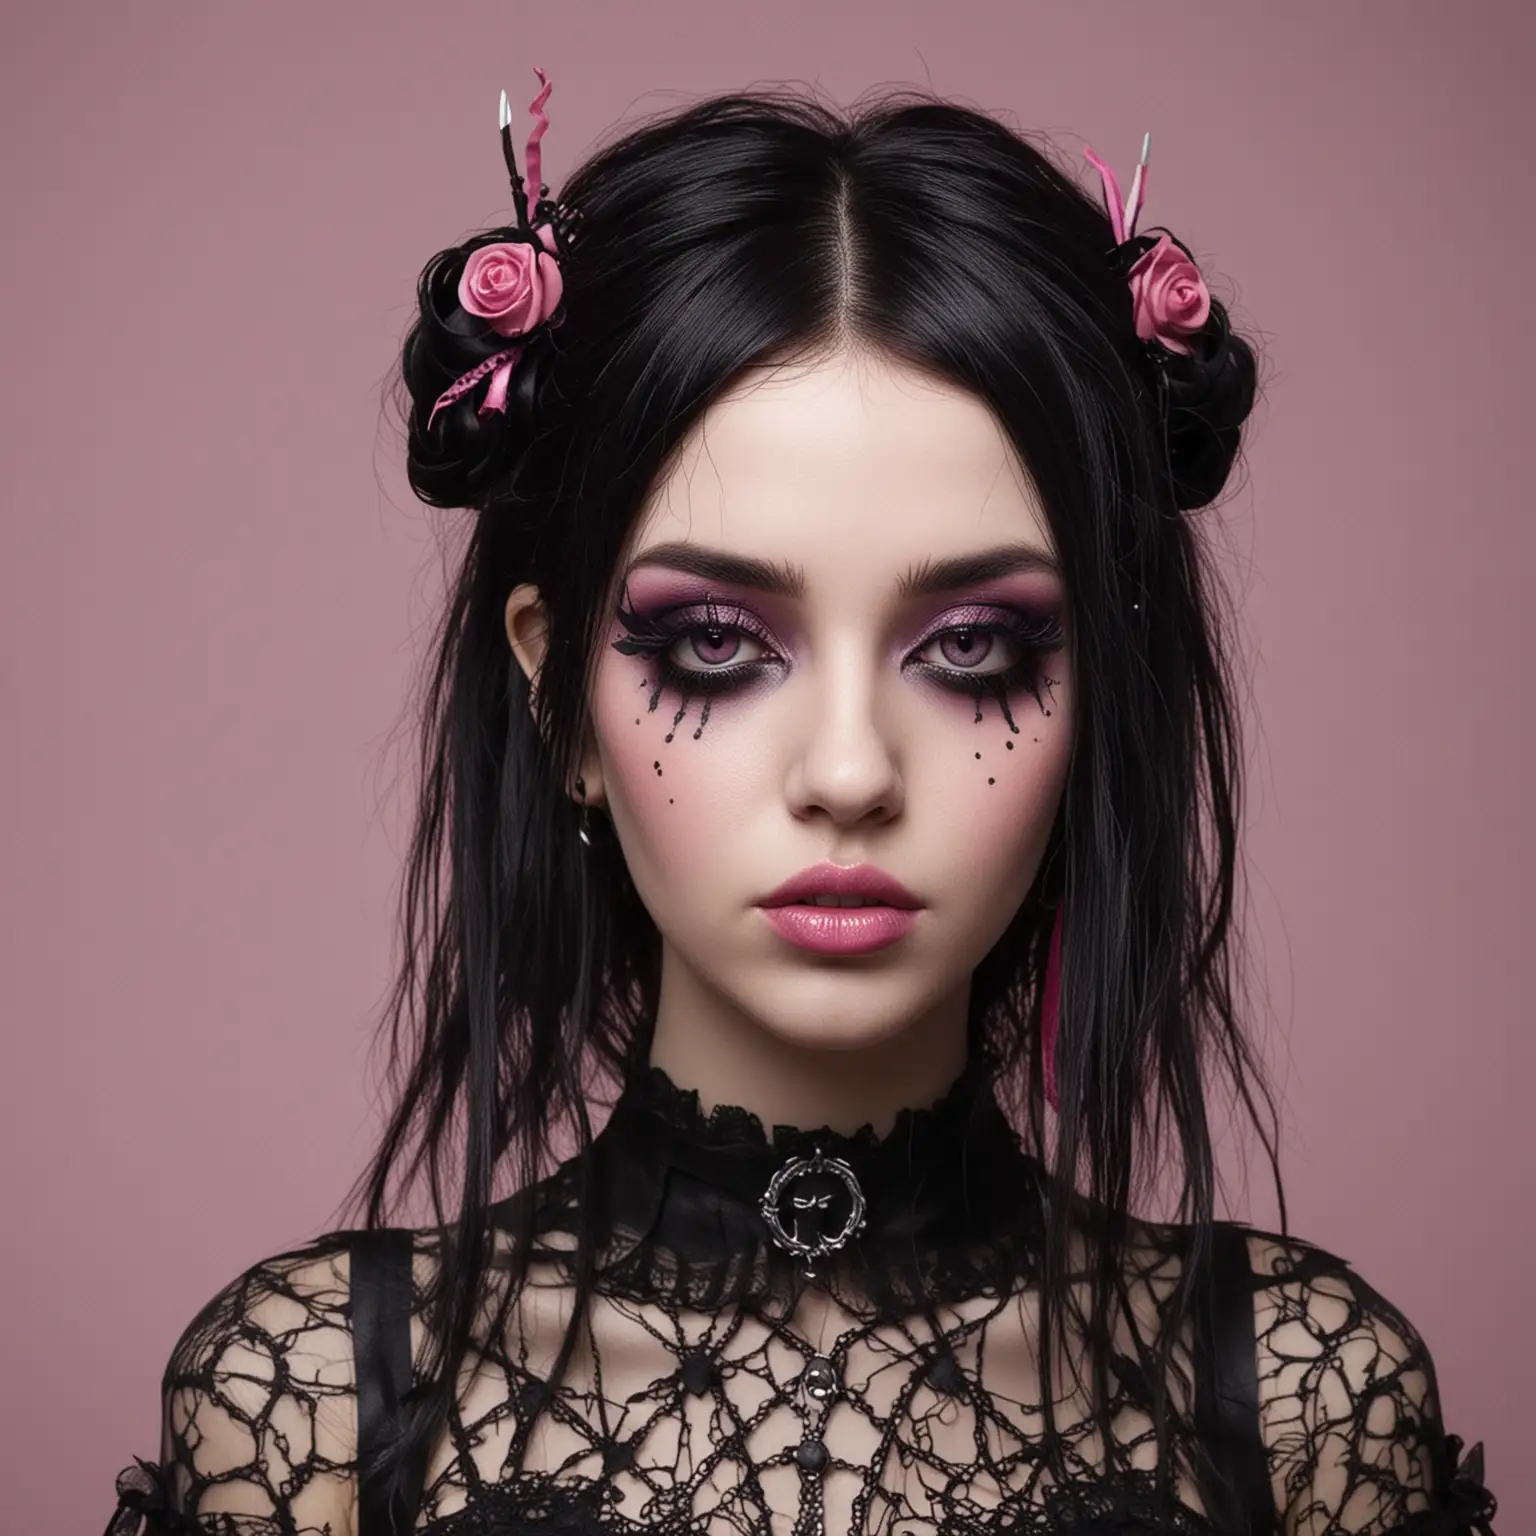 Goth girl, make it pink themed